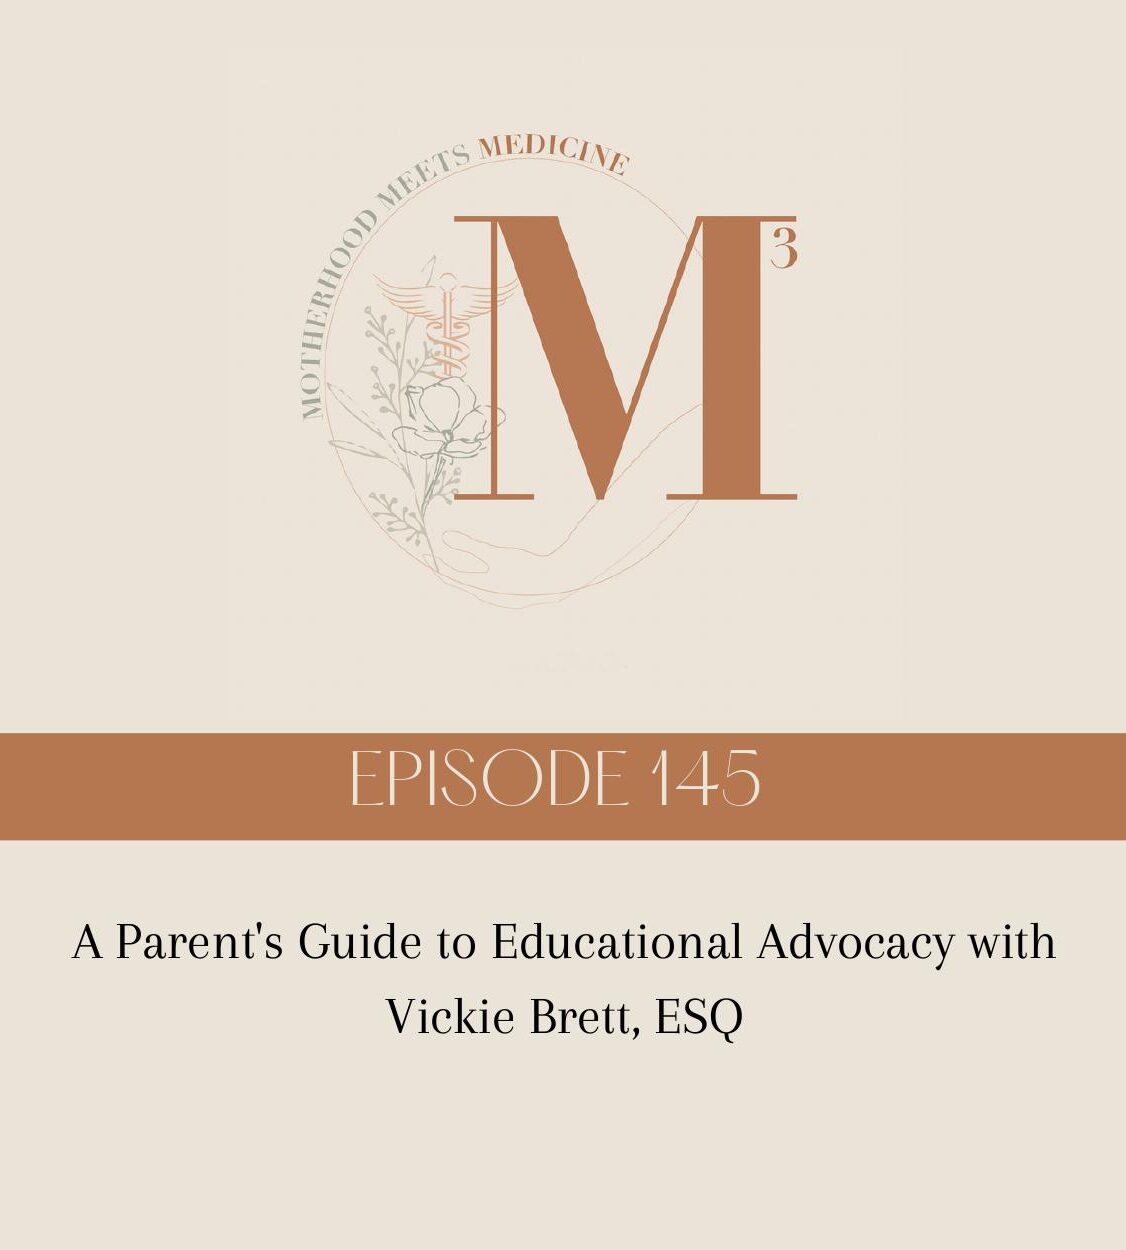 Episode 145: A Parent’s Guide to Educational Advocacy with Vickie Brett, ESQ